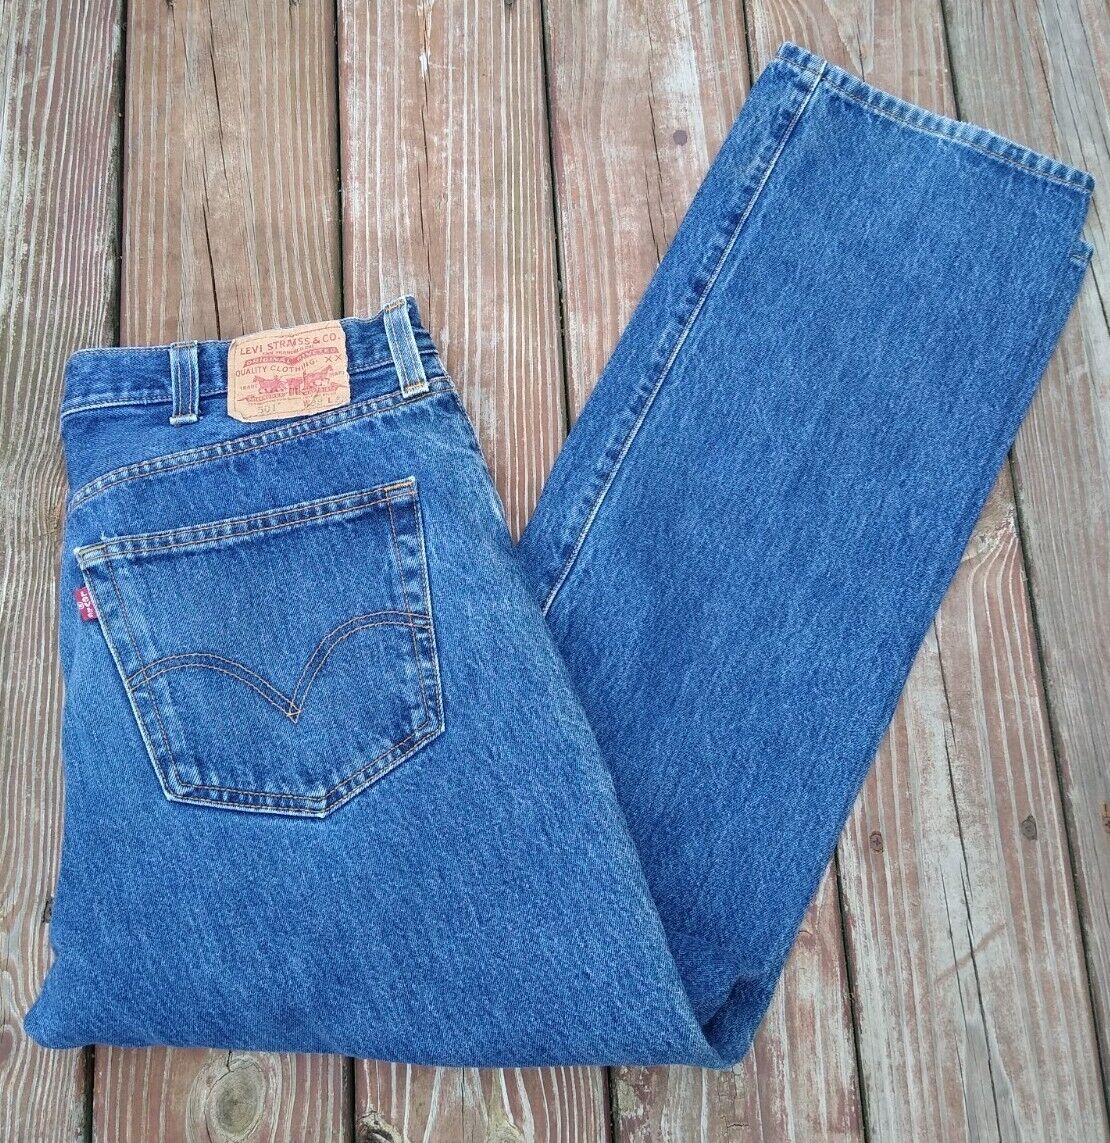 Levi's 501 Button Fly Straight Leg Jeans Men's Size 38X32 Distressed Med  Wash | eBay